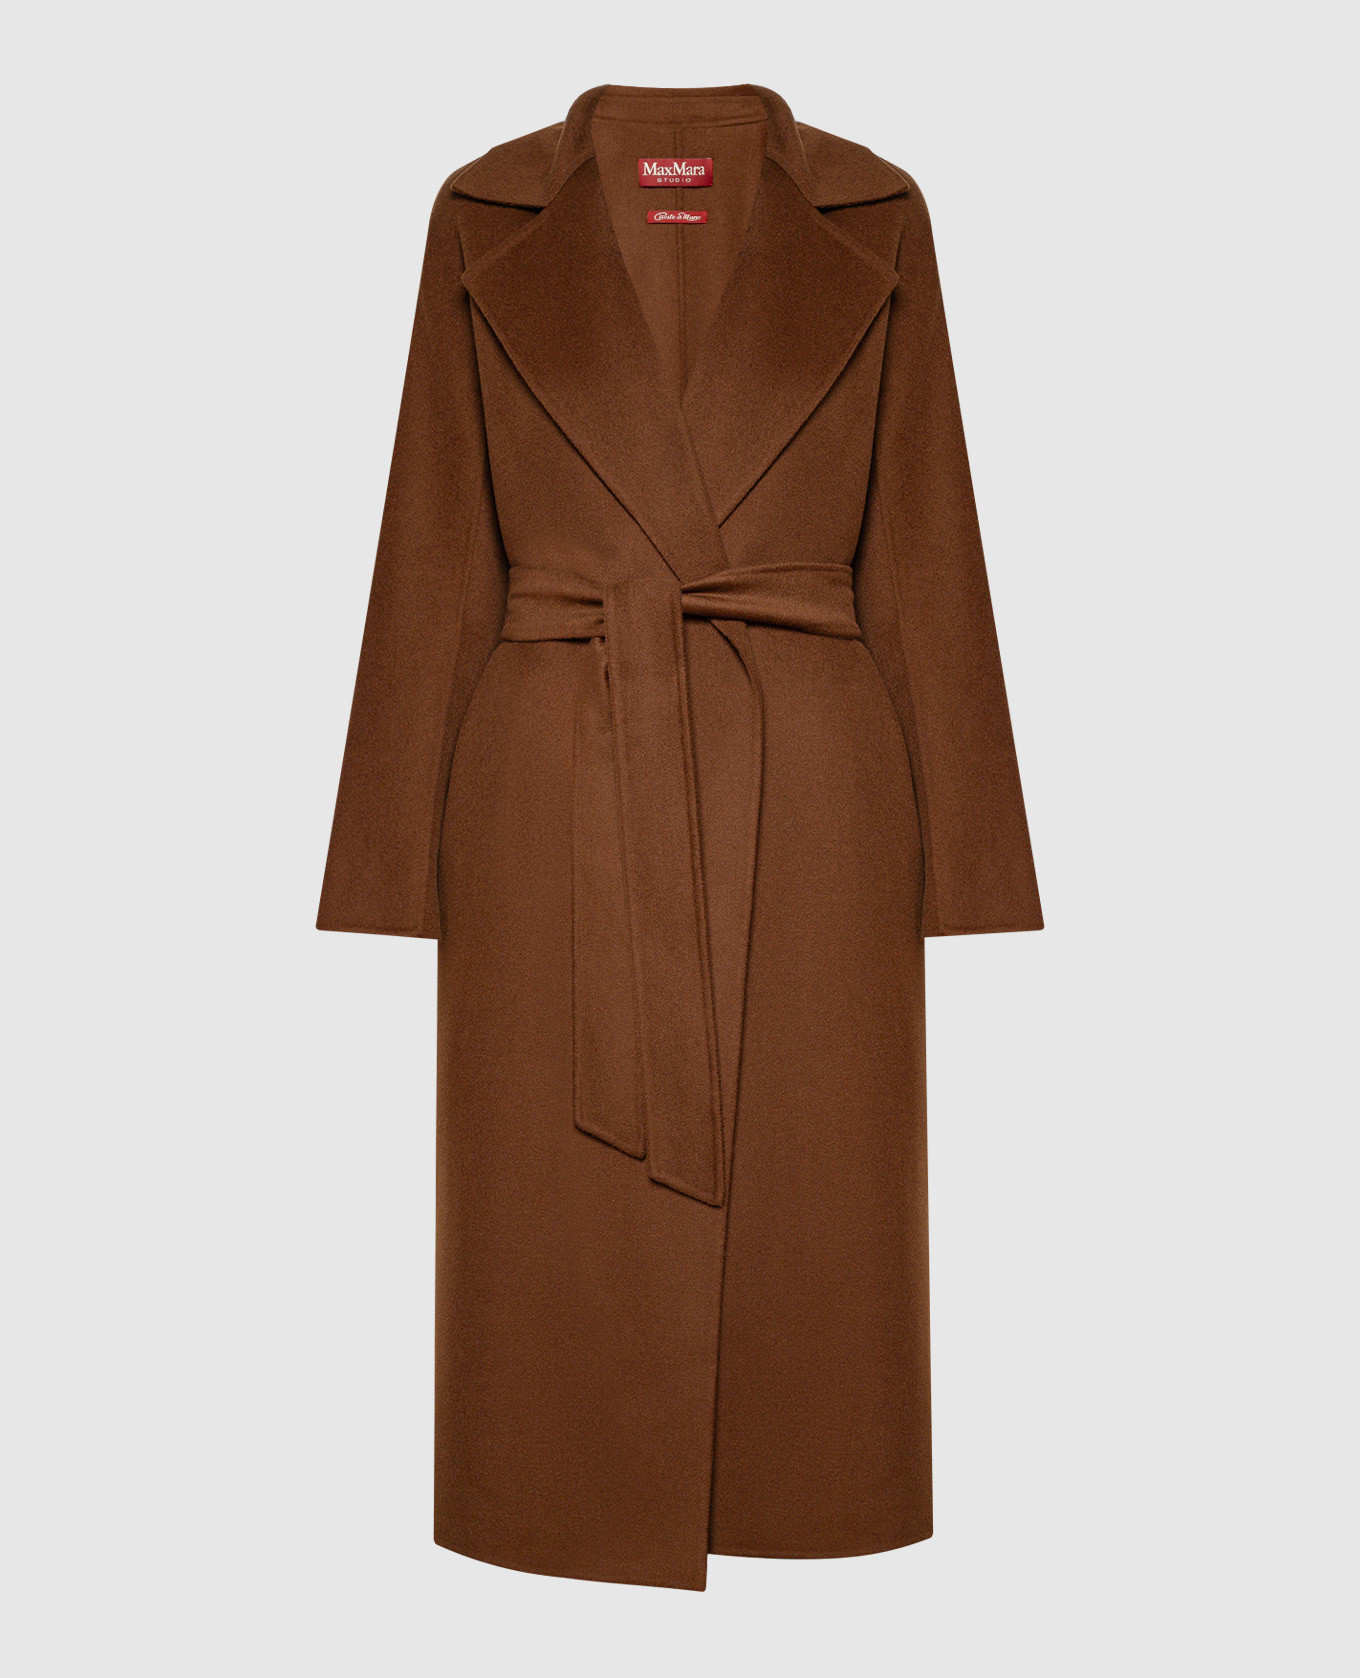 Cles brown wool, cashmere and silk coat